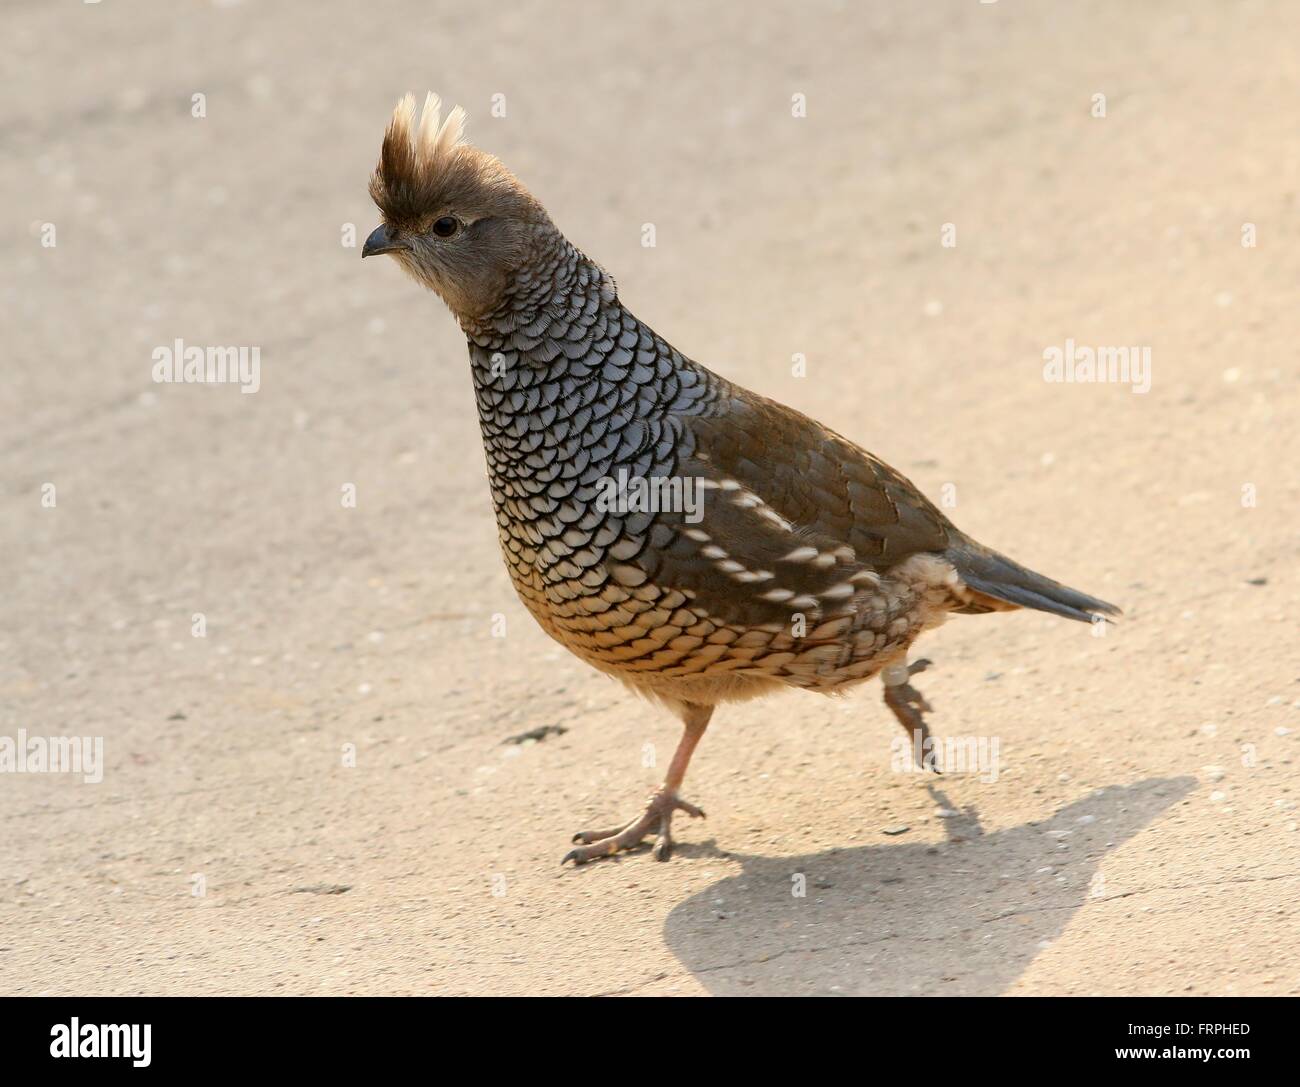 Scaled quail or Blue quail (Callipepla squamata), native to the arid southwestern USA and North & Central Mexican deserts Stock Photo